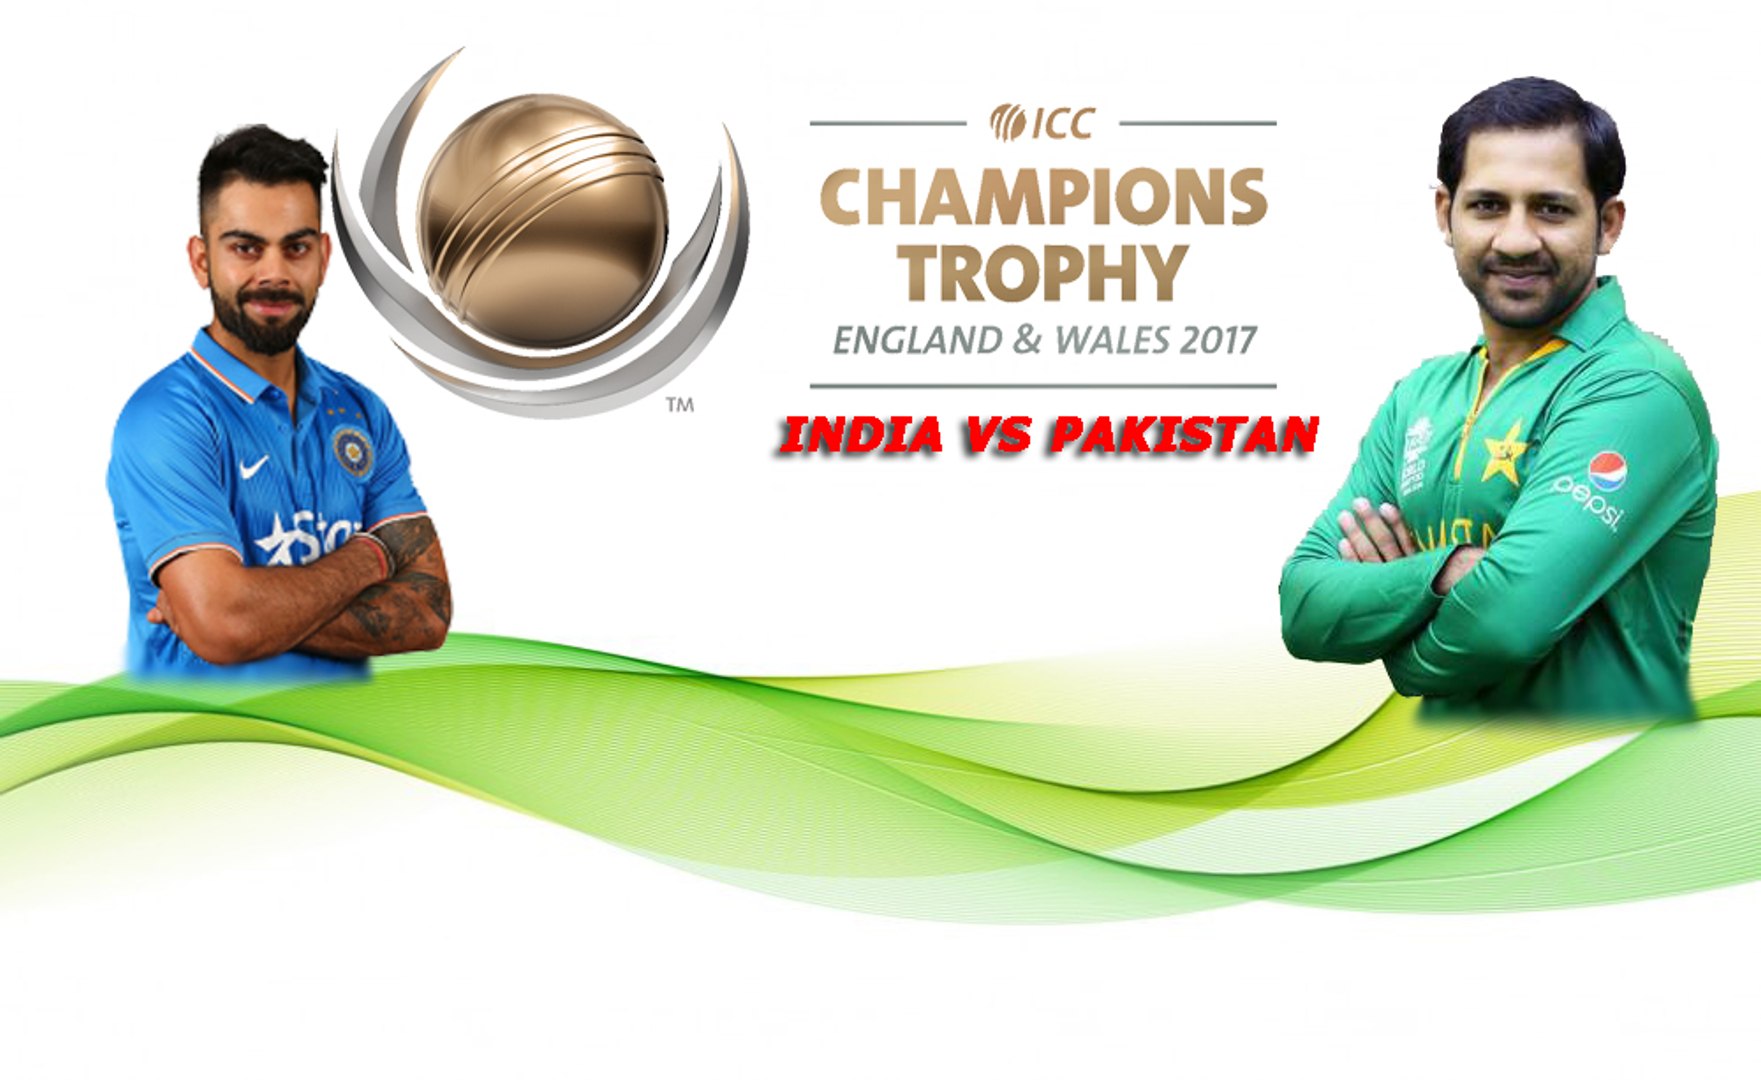 Pakistan vs India Match in Champions Trophy 2017 news